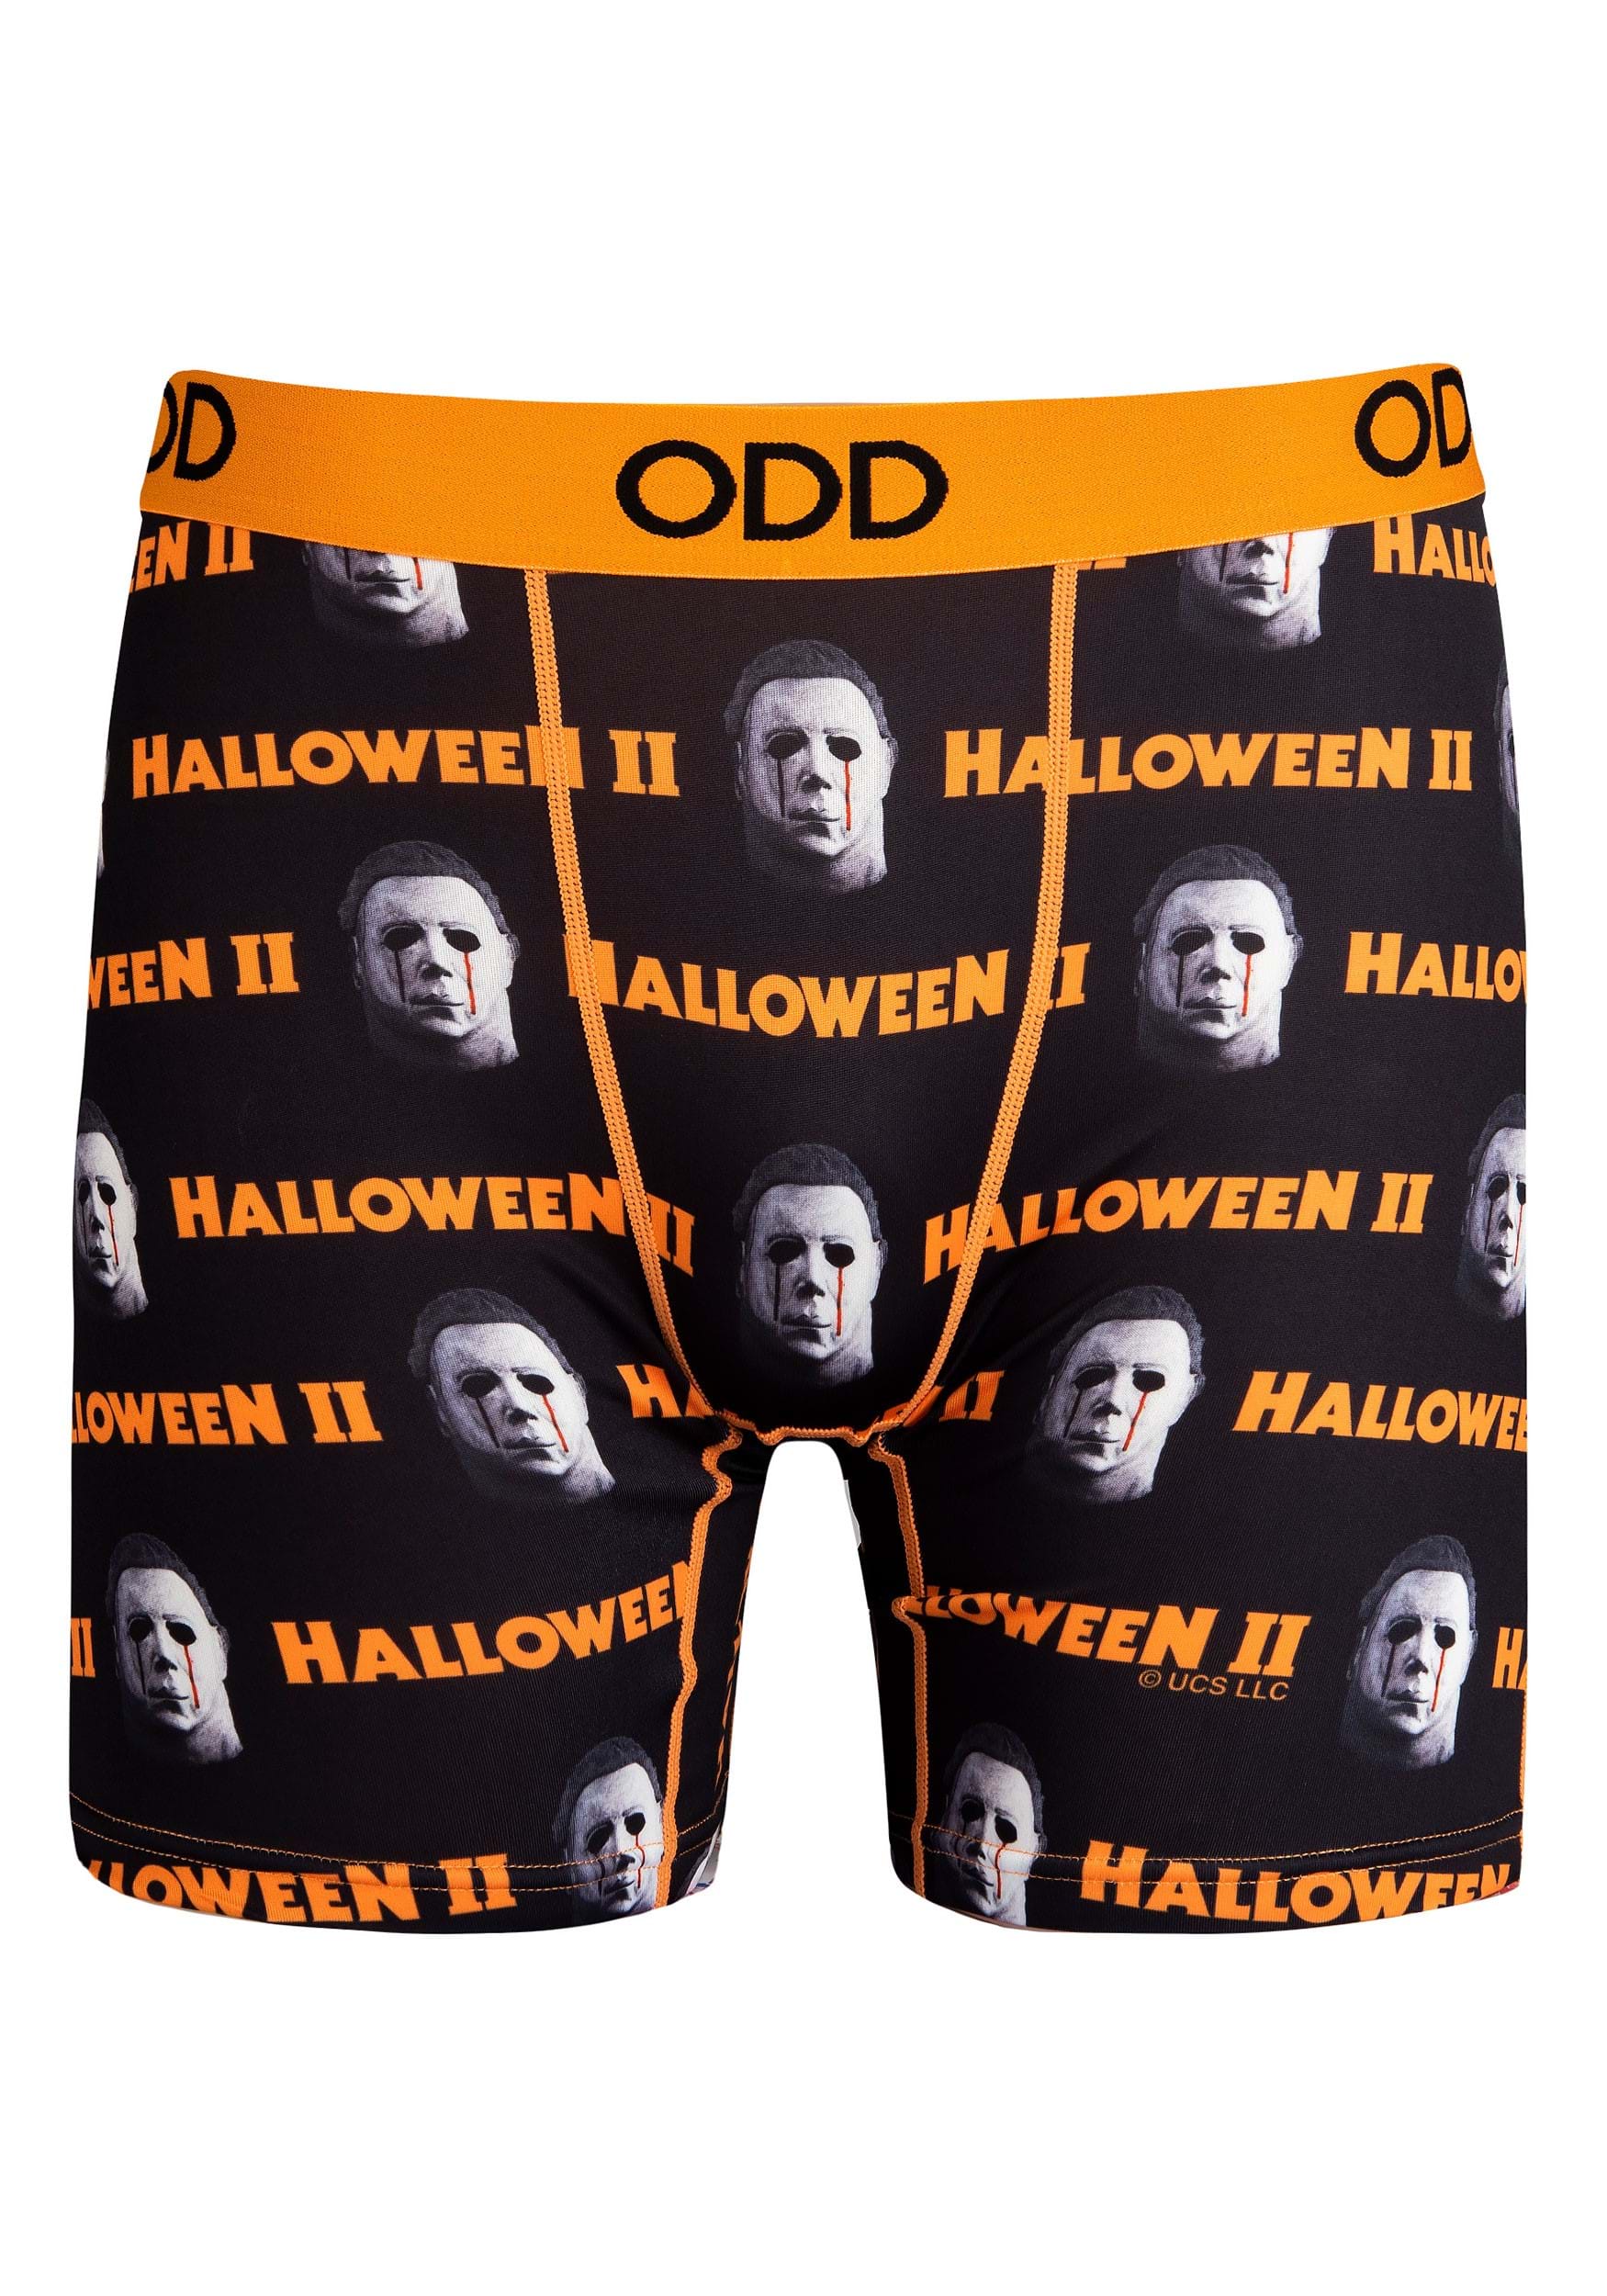 https://images.fun.com/products/81442/1-1/halloween-2-mens-boxer-briefs.jpg